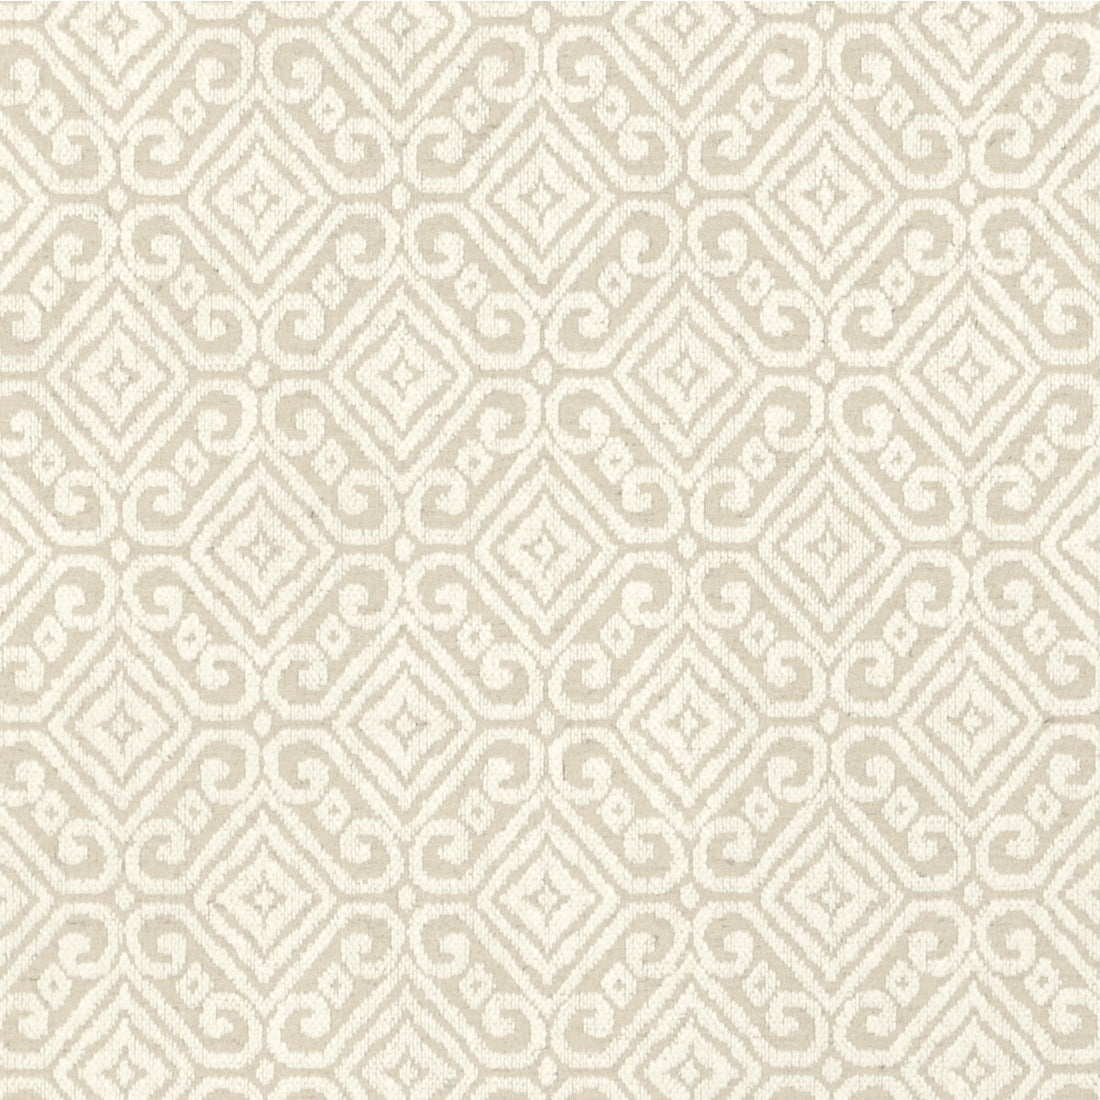 Prado Weave fabric in pearl color - pattern 2021106.1.0 - by Lee Jofa in the Triana Weaves collection